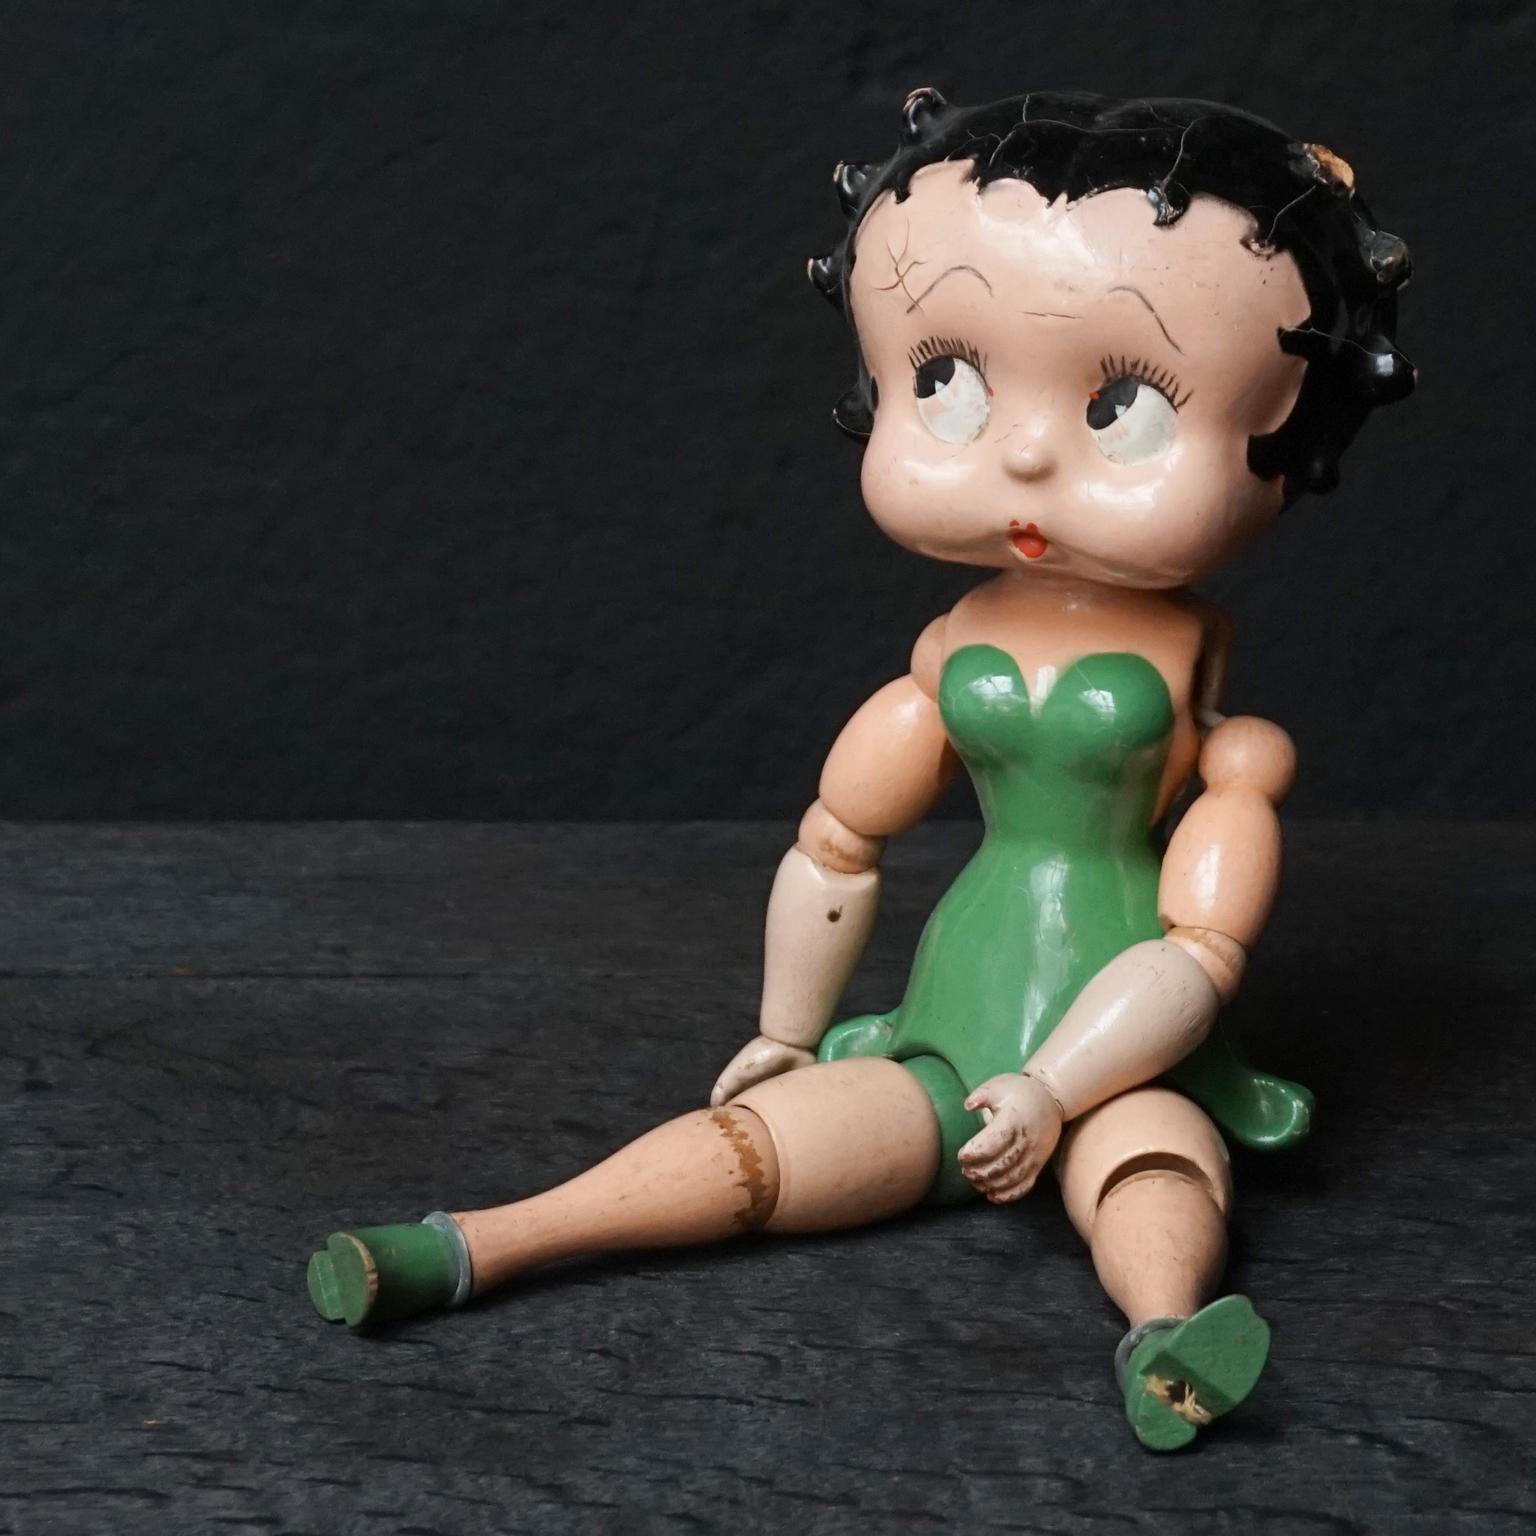 Jointed wooden Betty Boop doll by Fleischer in a green dress.

This is one of the first Betty Boop dolls that were created in the 1930s and debuted in 1931. Only 1000 of these wooden-jointed dolls were made. You could buy them in black, red and